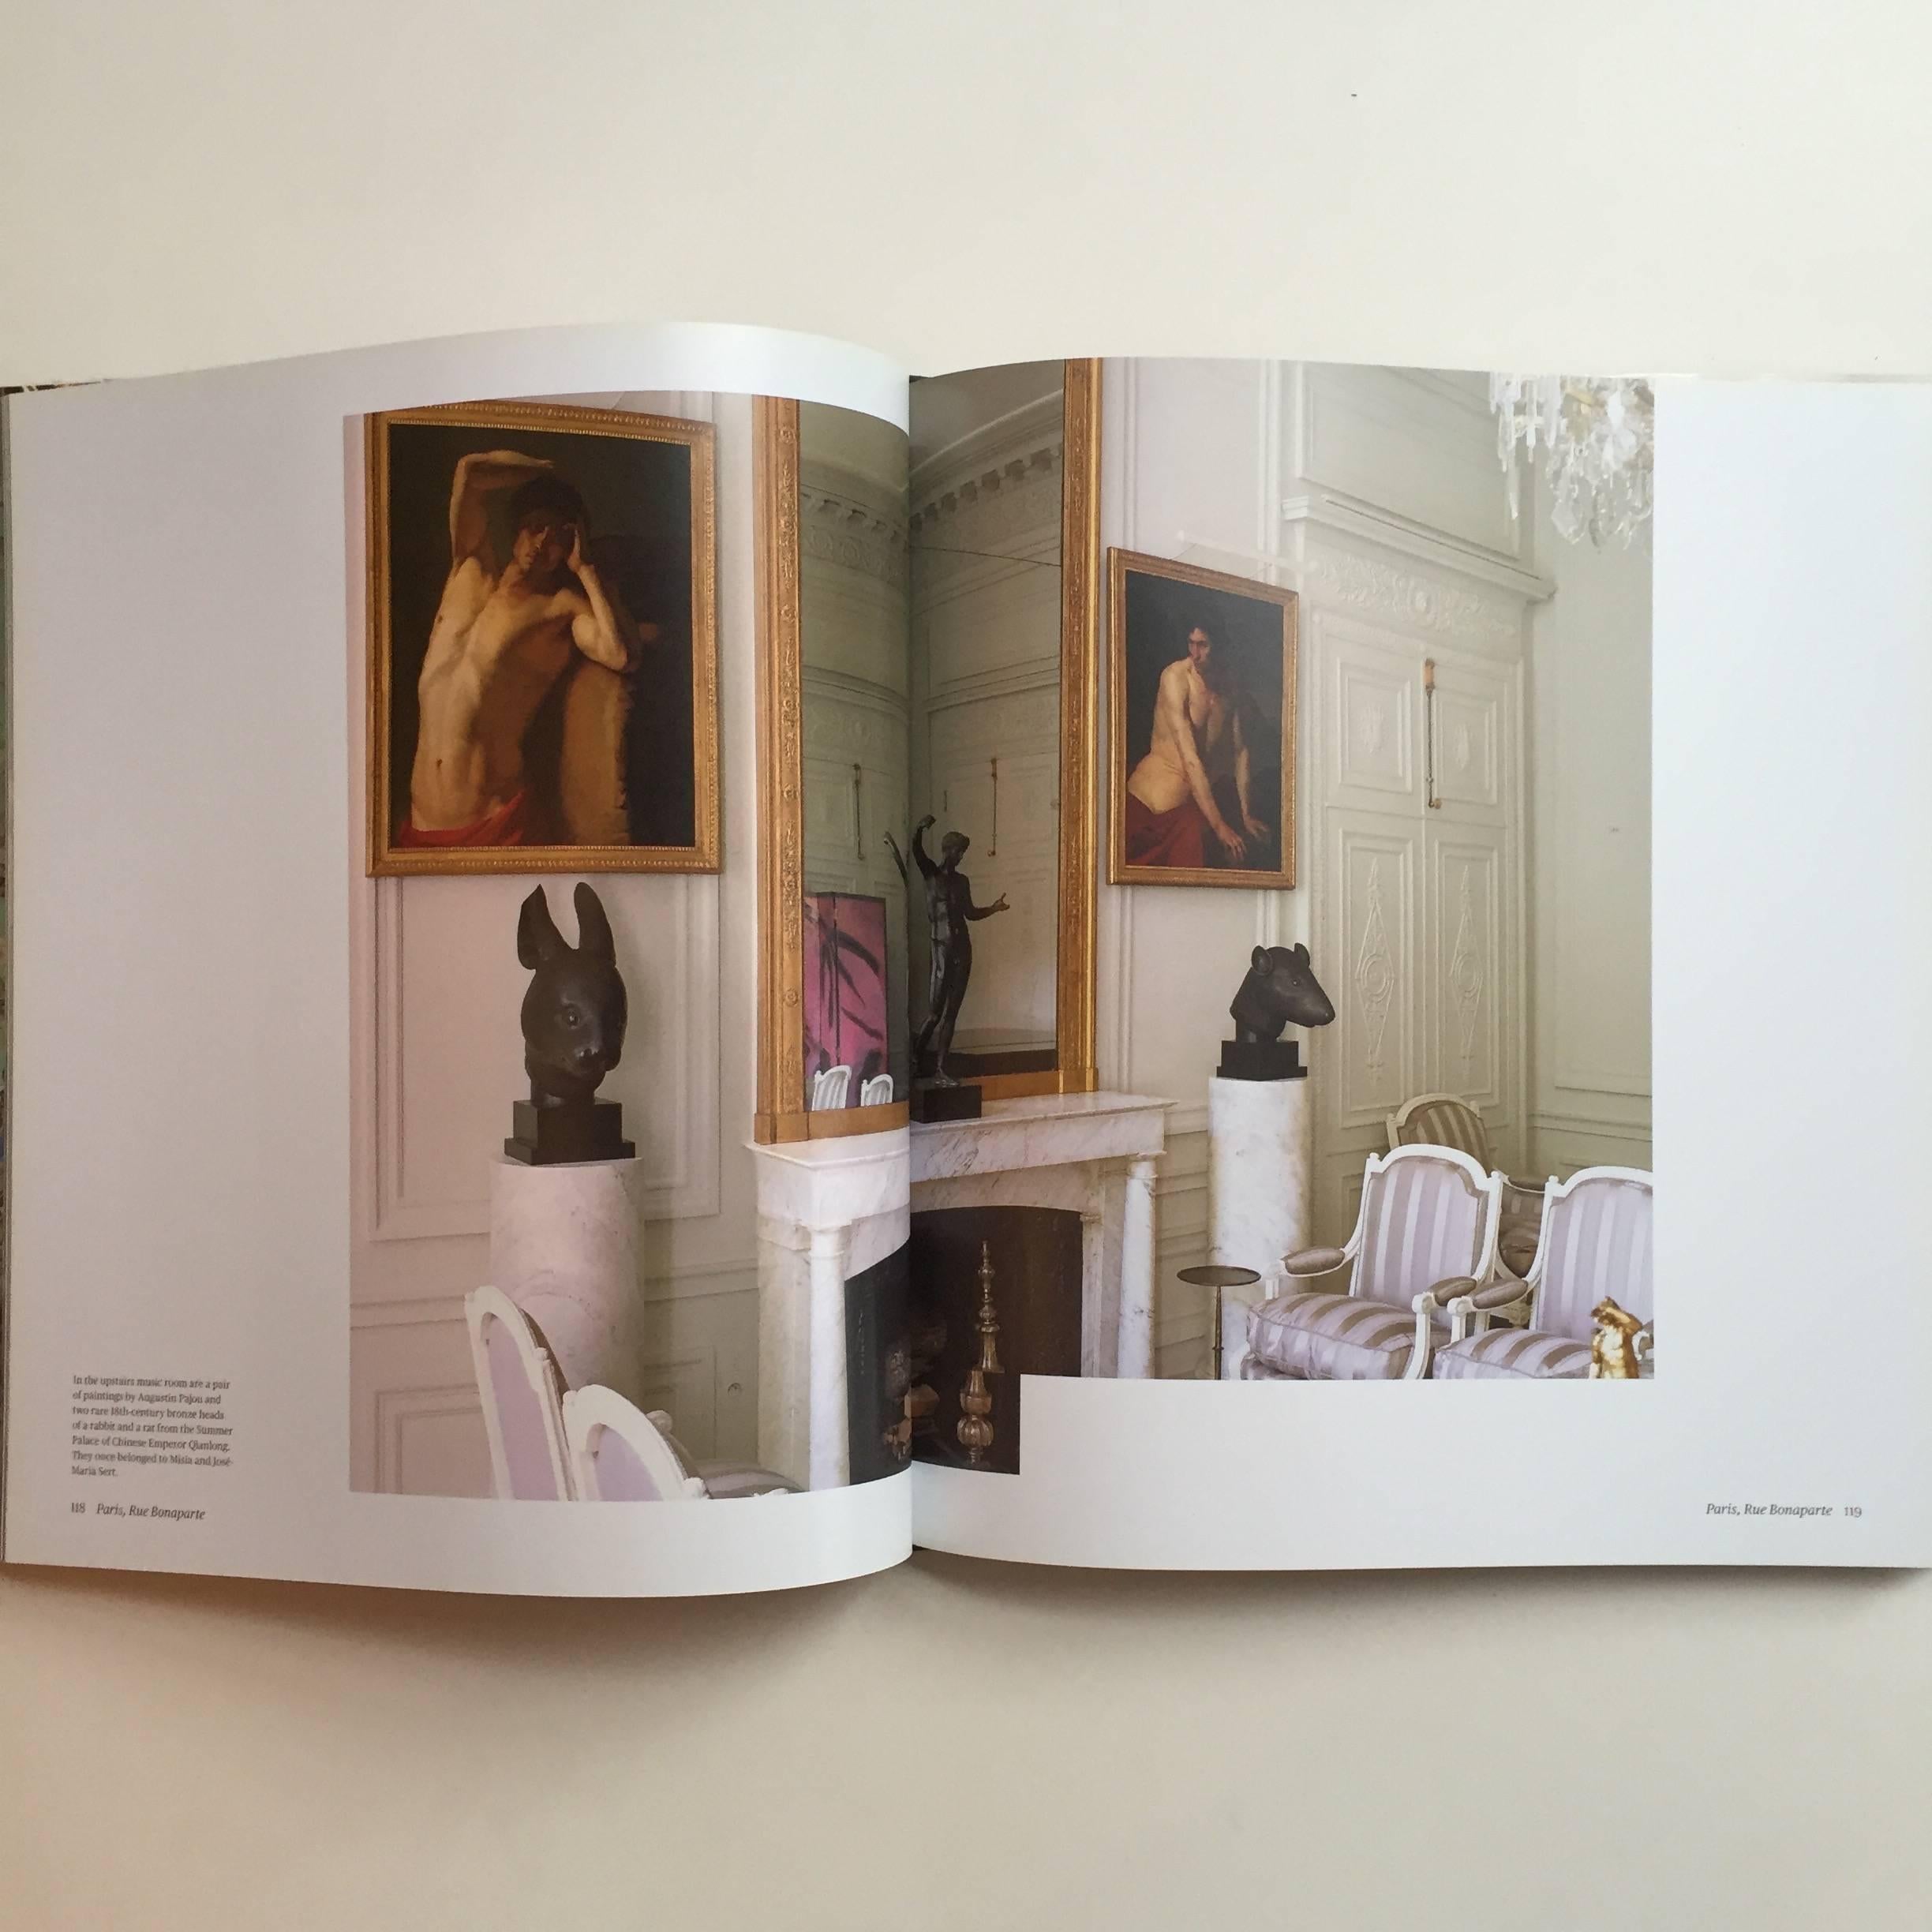 First edition, published by Thames & Hudson, 2009

By Robert Murphy & Ivan Terestchenko with an introduction by Pierre Bergé

This beautiful book is an intimate window in to the homes and lives of two supreme connoisseurs of taste and